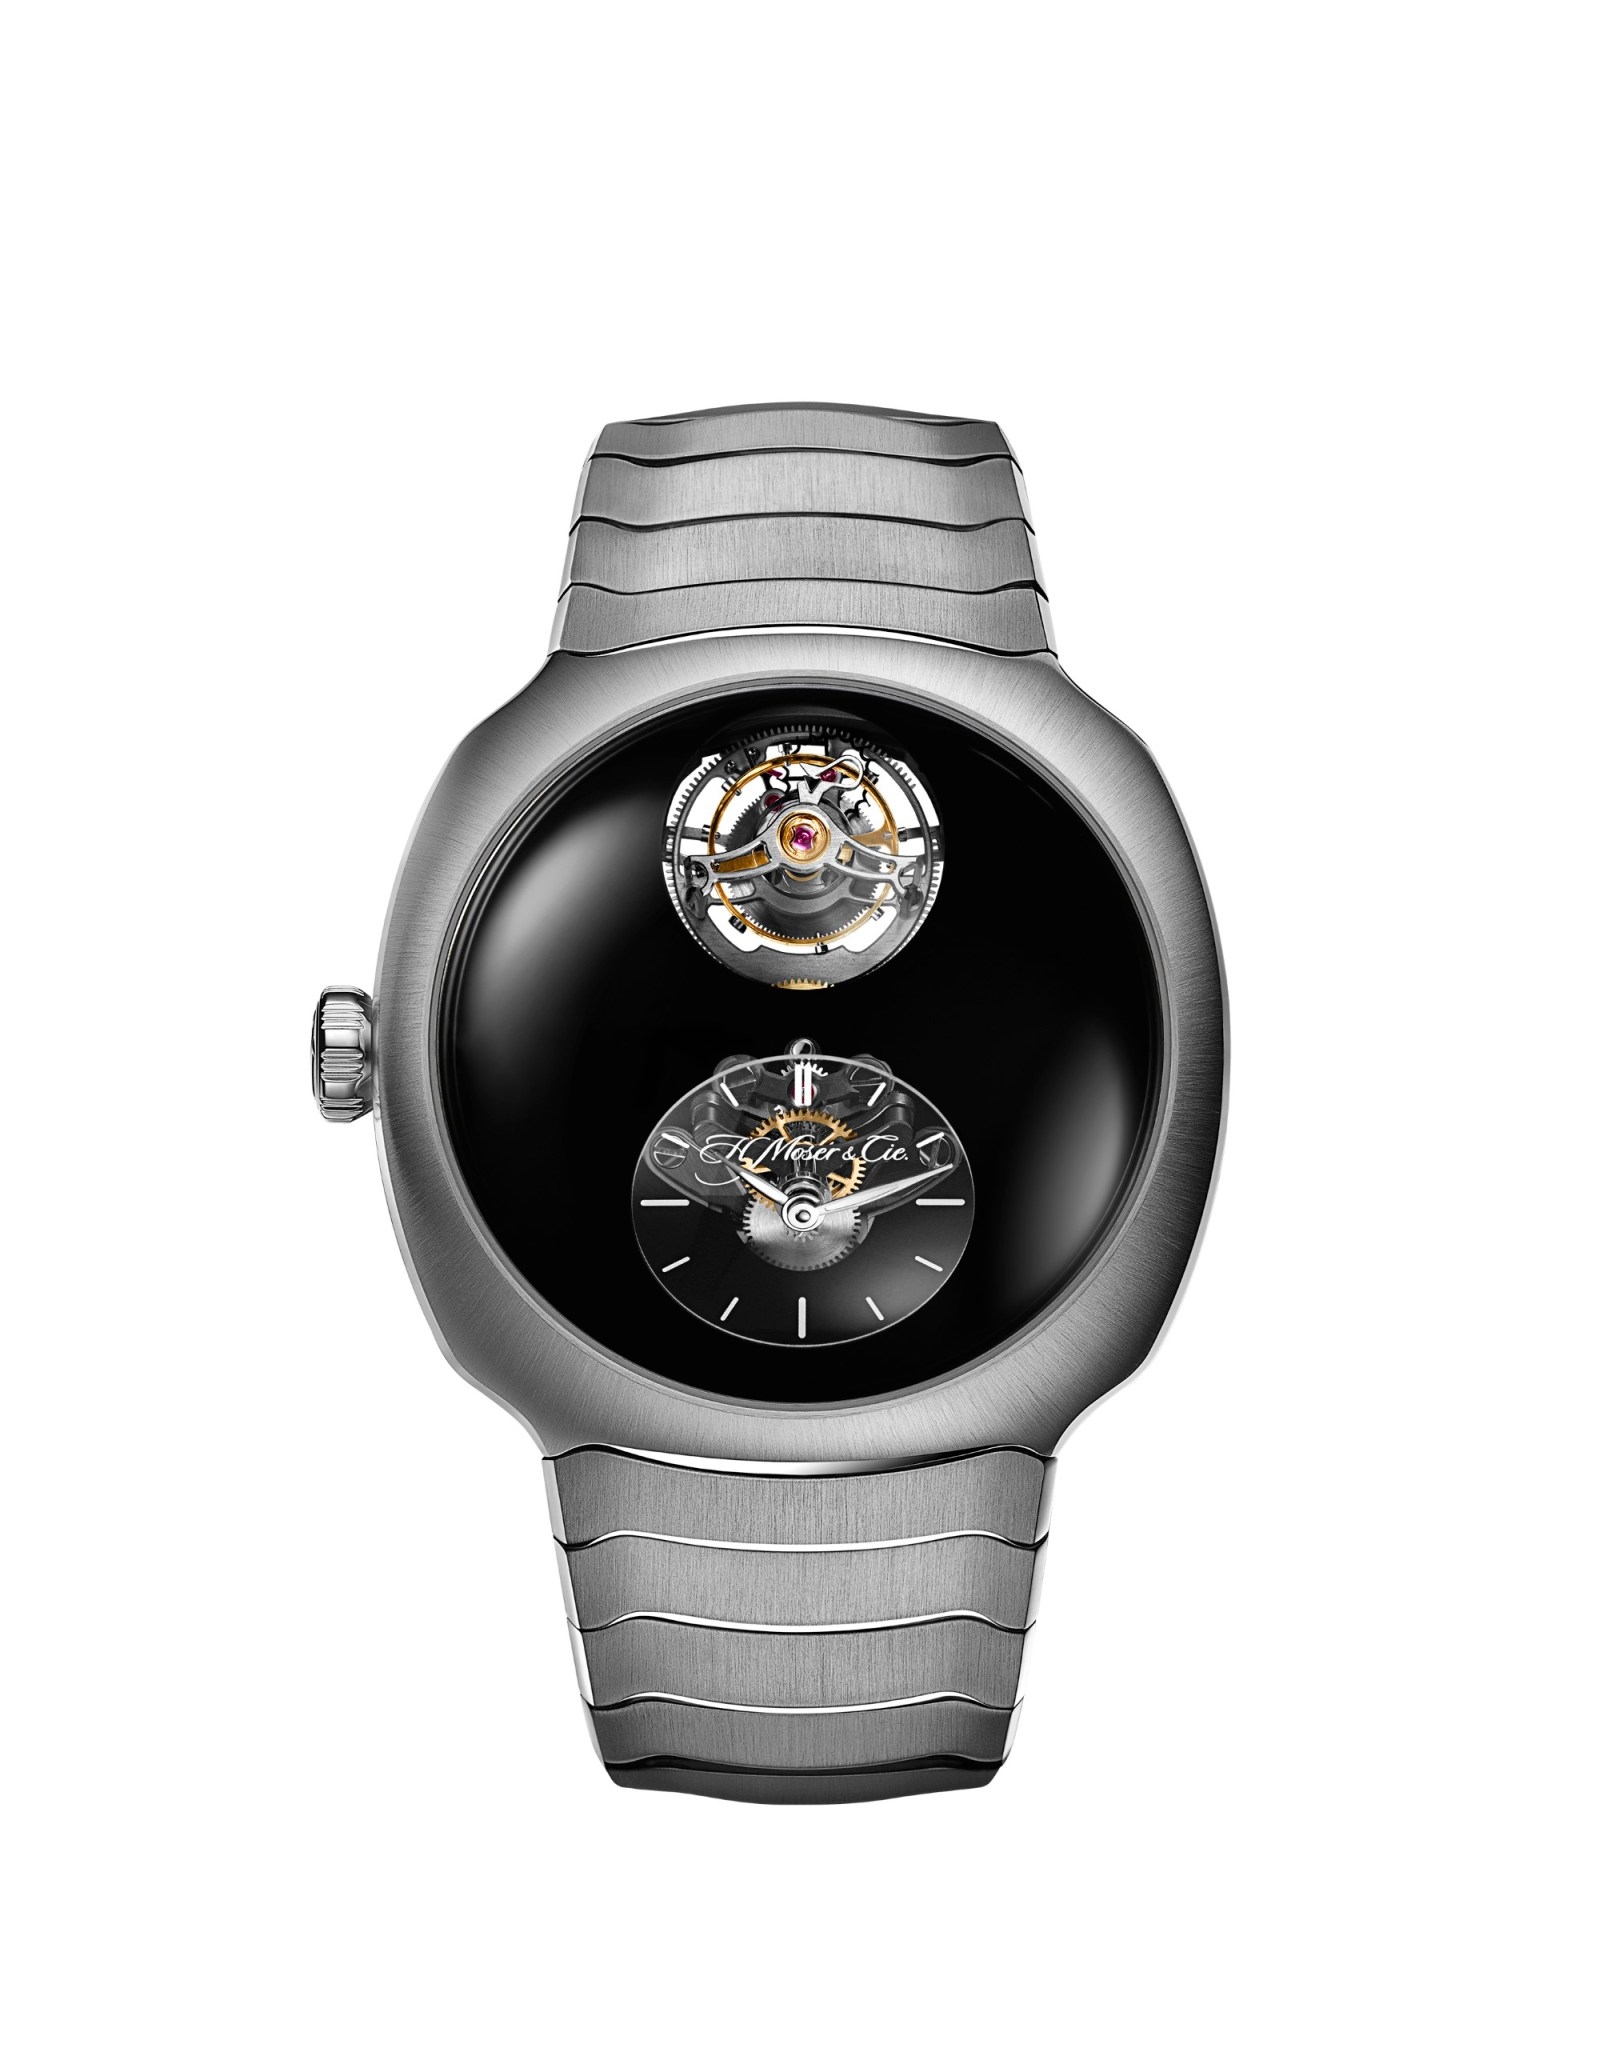 Đồng hồ H. Moser & Cie. Streamliner Cylindrical Tourbillon Only Watch 2021